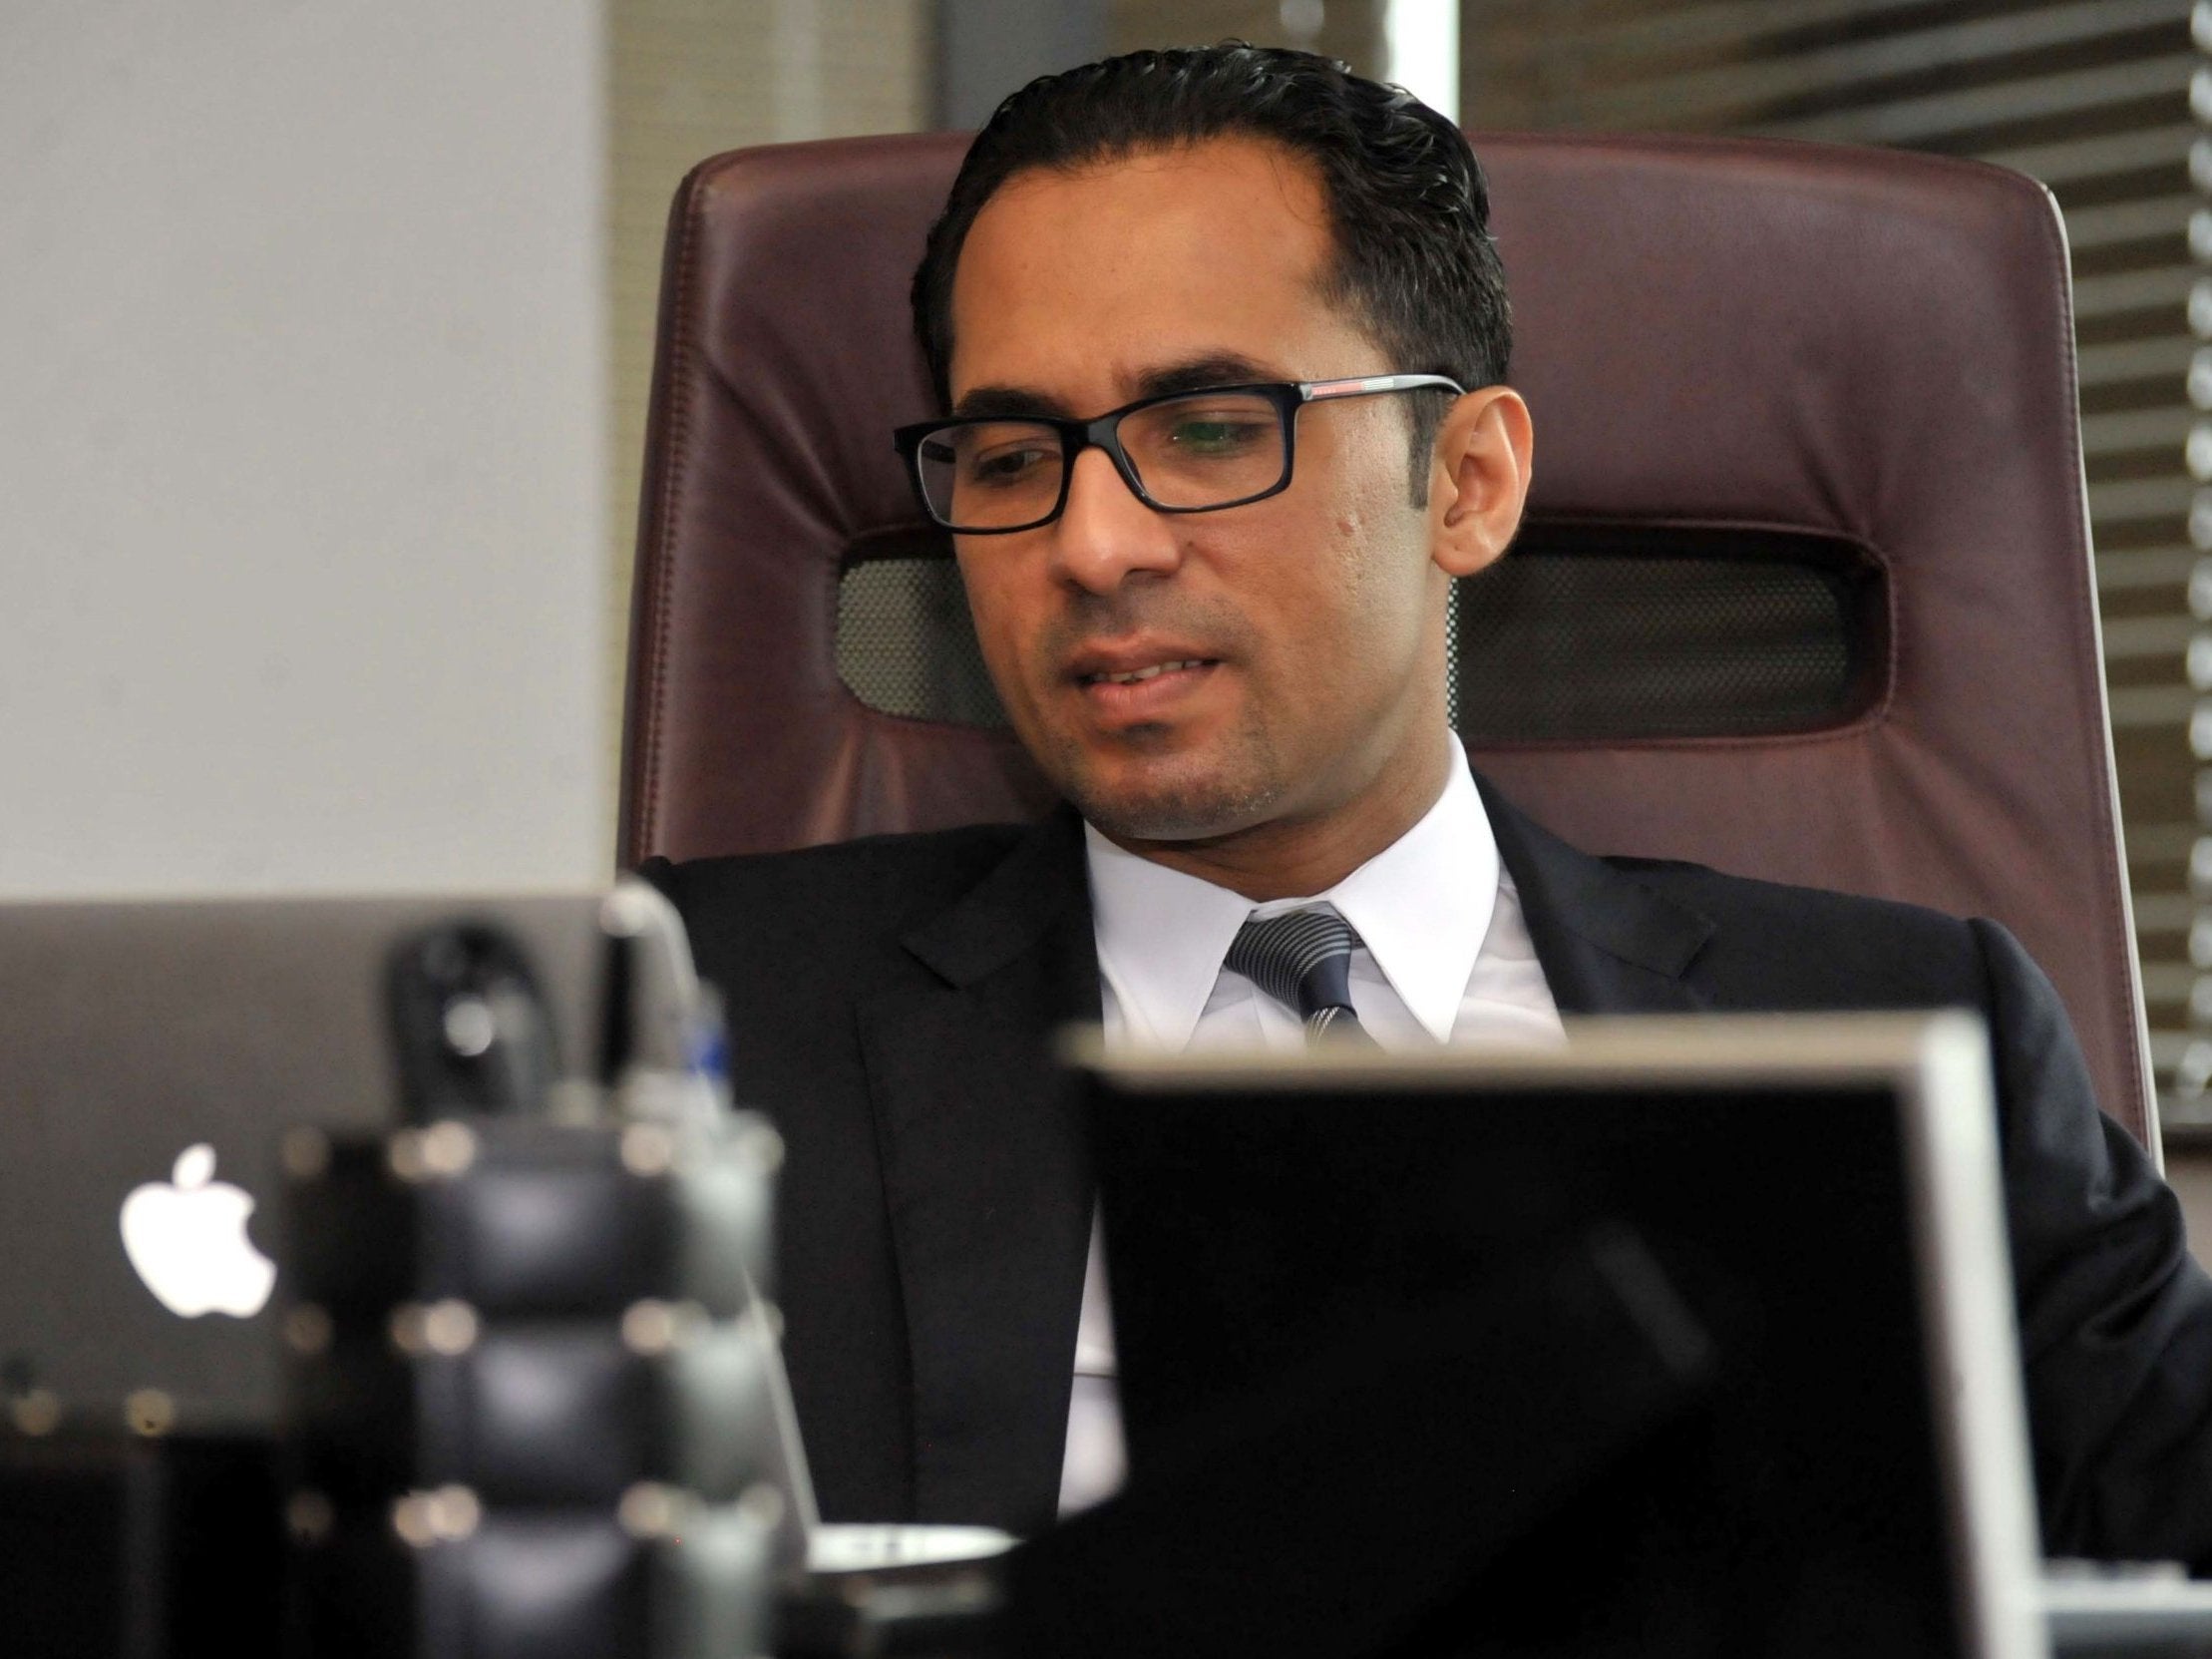 Mohammed Dewji made history in 2013 when he became the first Tanzanian to grace the cover of Forbes magazine